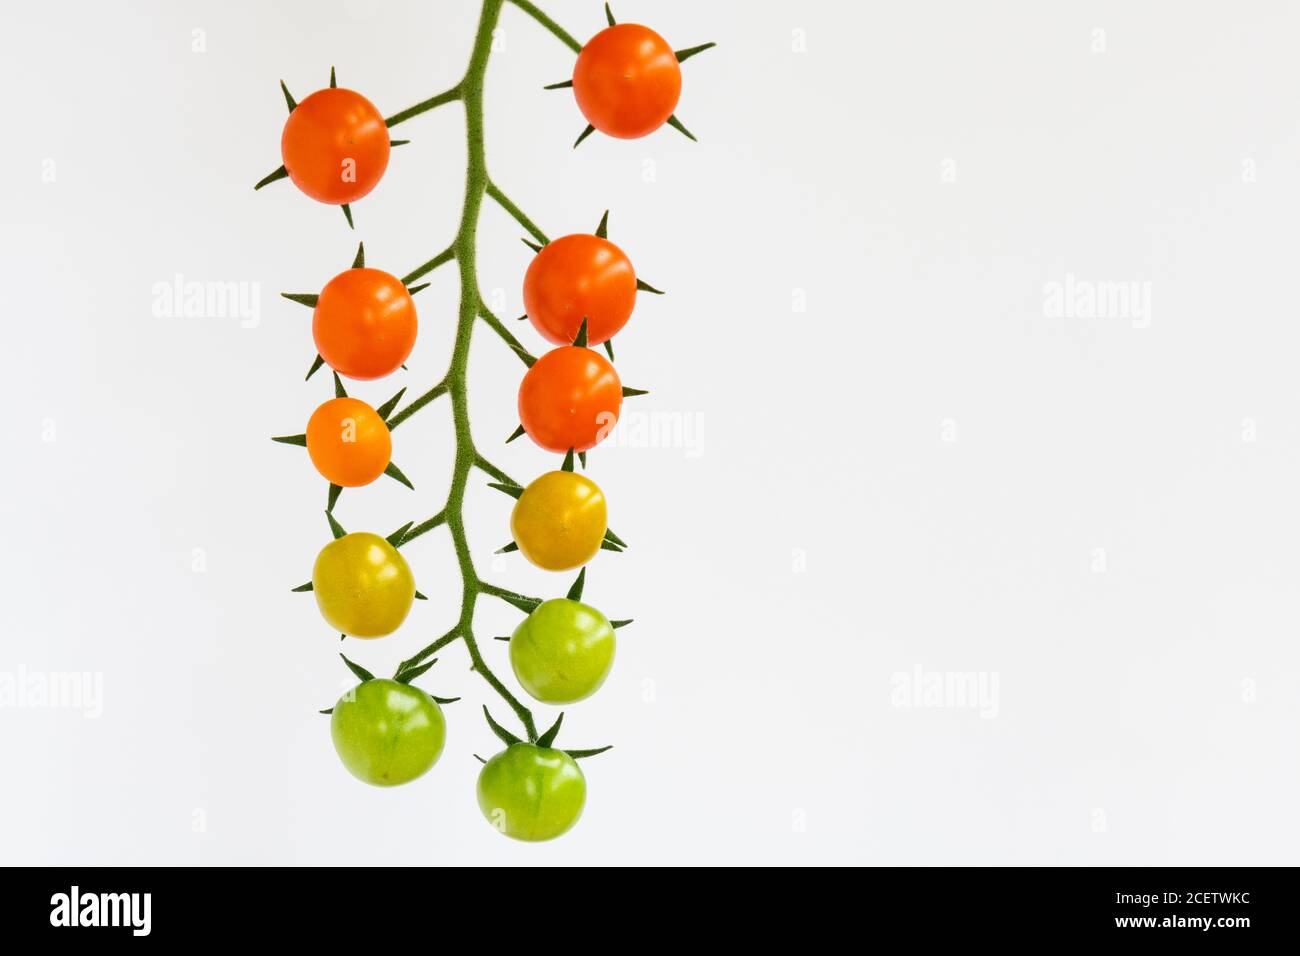 Sungold tomatoes - truss of home grown ripe, ripening and unripe orange, yellow and green organic cherry tomatoes against a white background Stock Photo